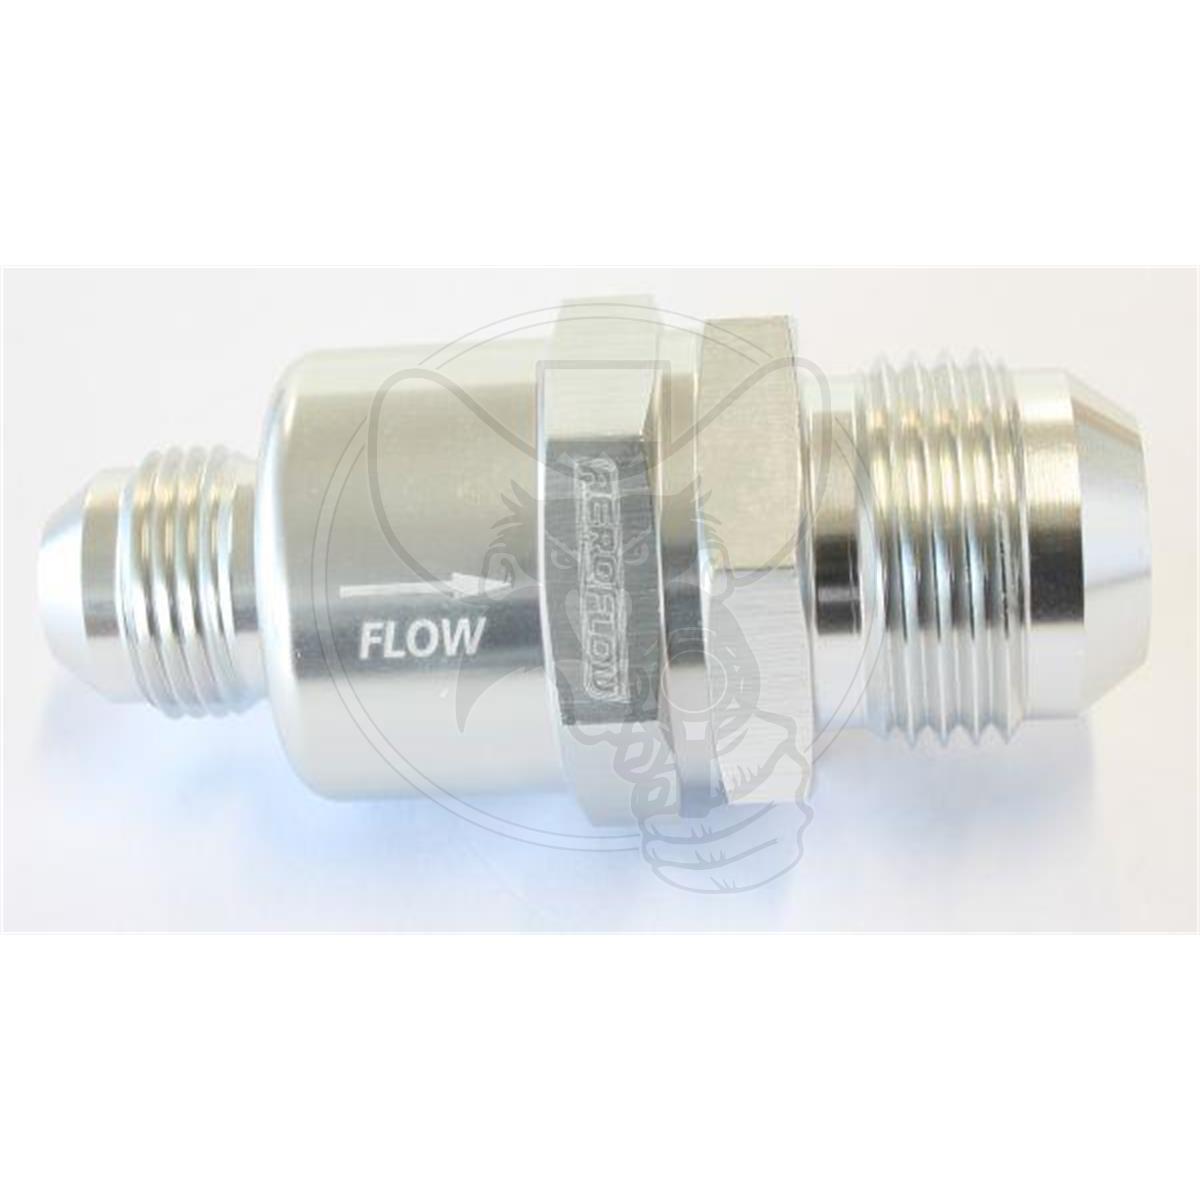 AEROFLOW 1-WAY STEPPED CHECK VALVE -12 TO -8AN SILVER FINISH